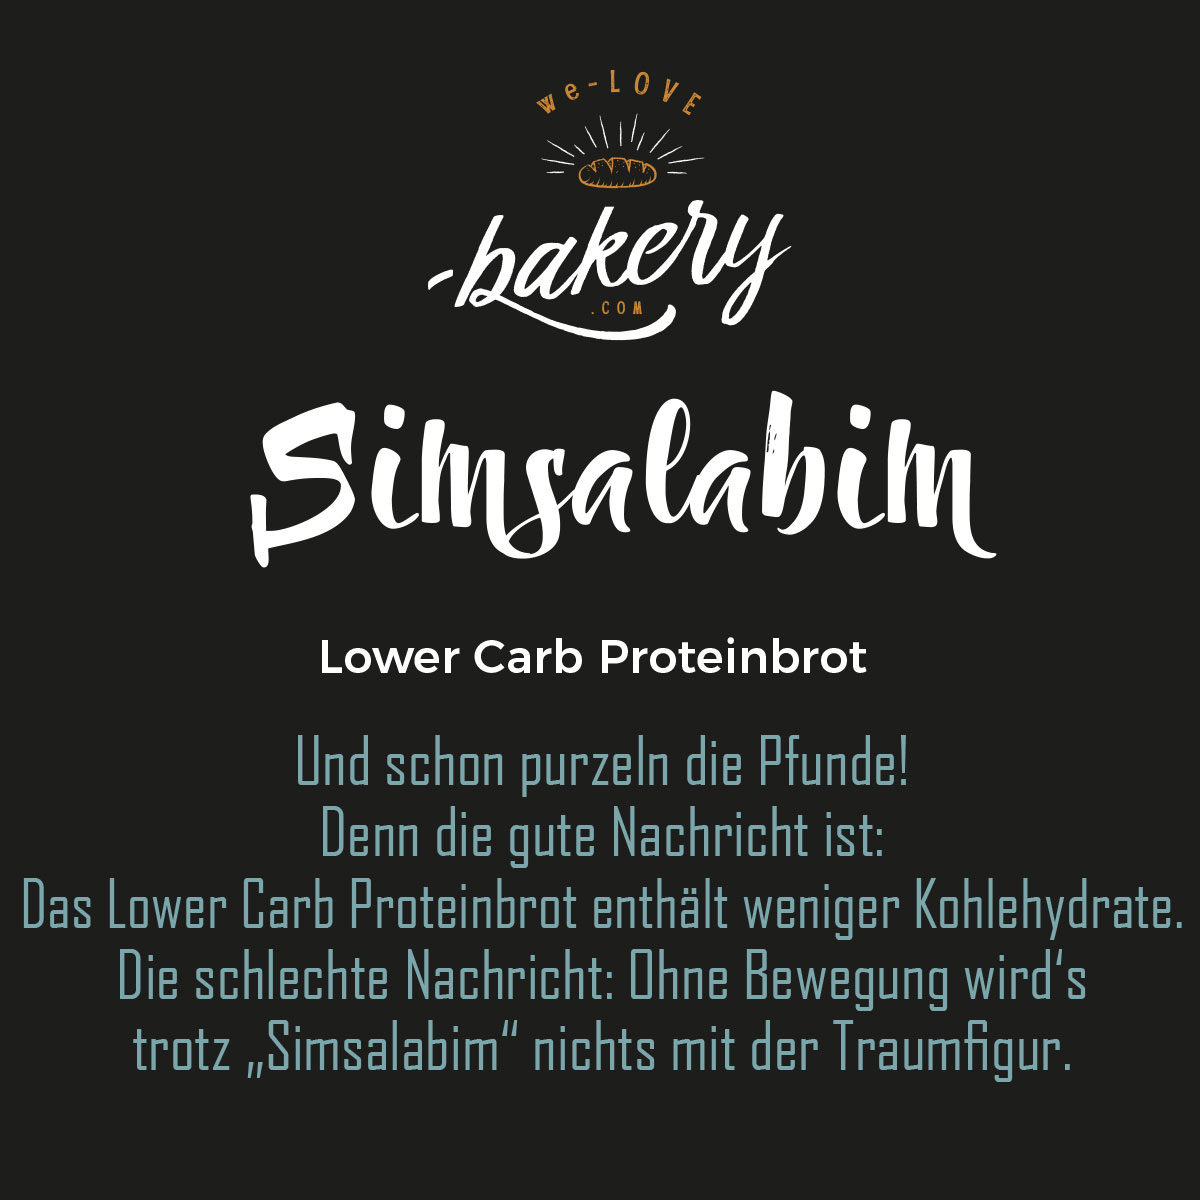 Lower Carb Proteinbrot